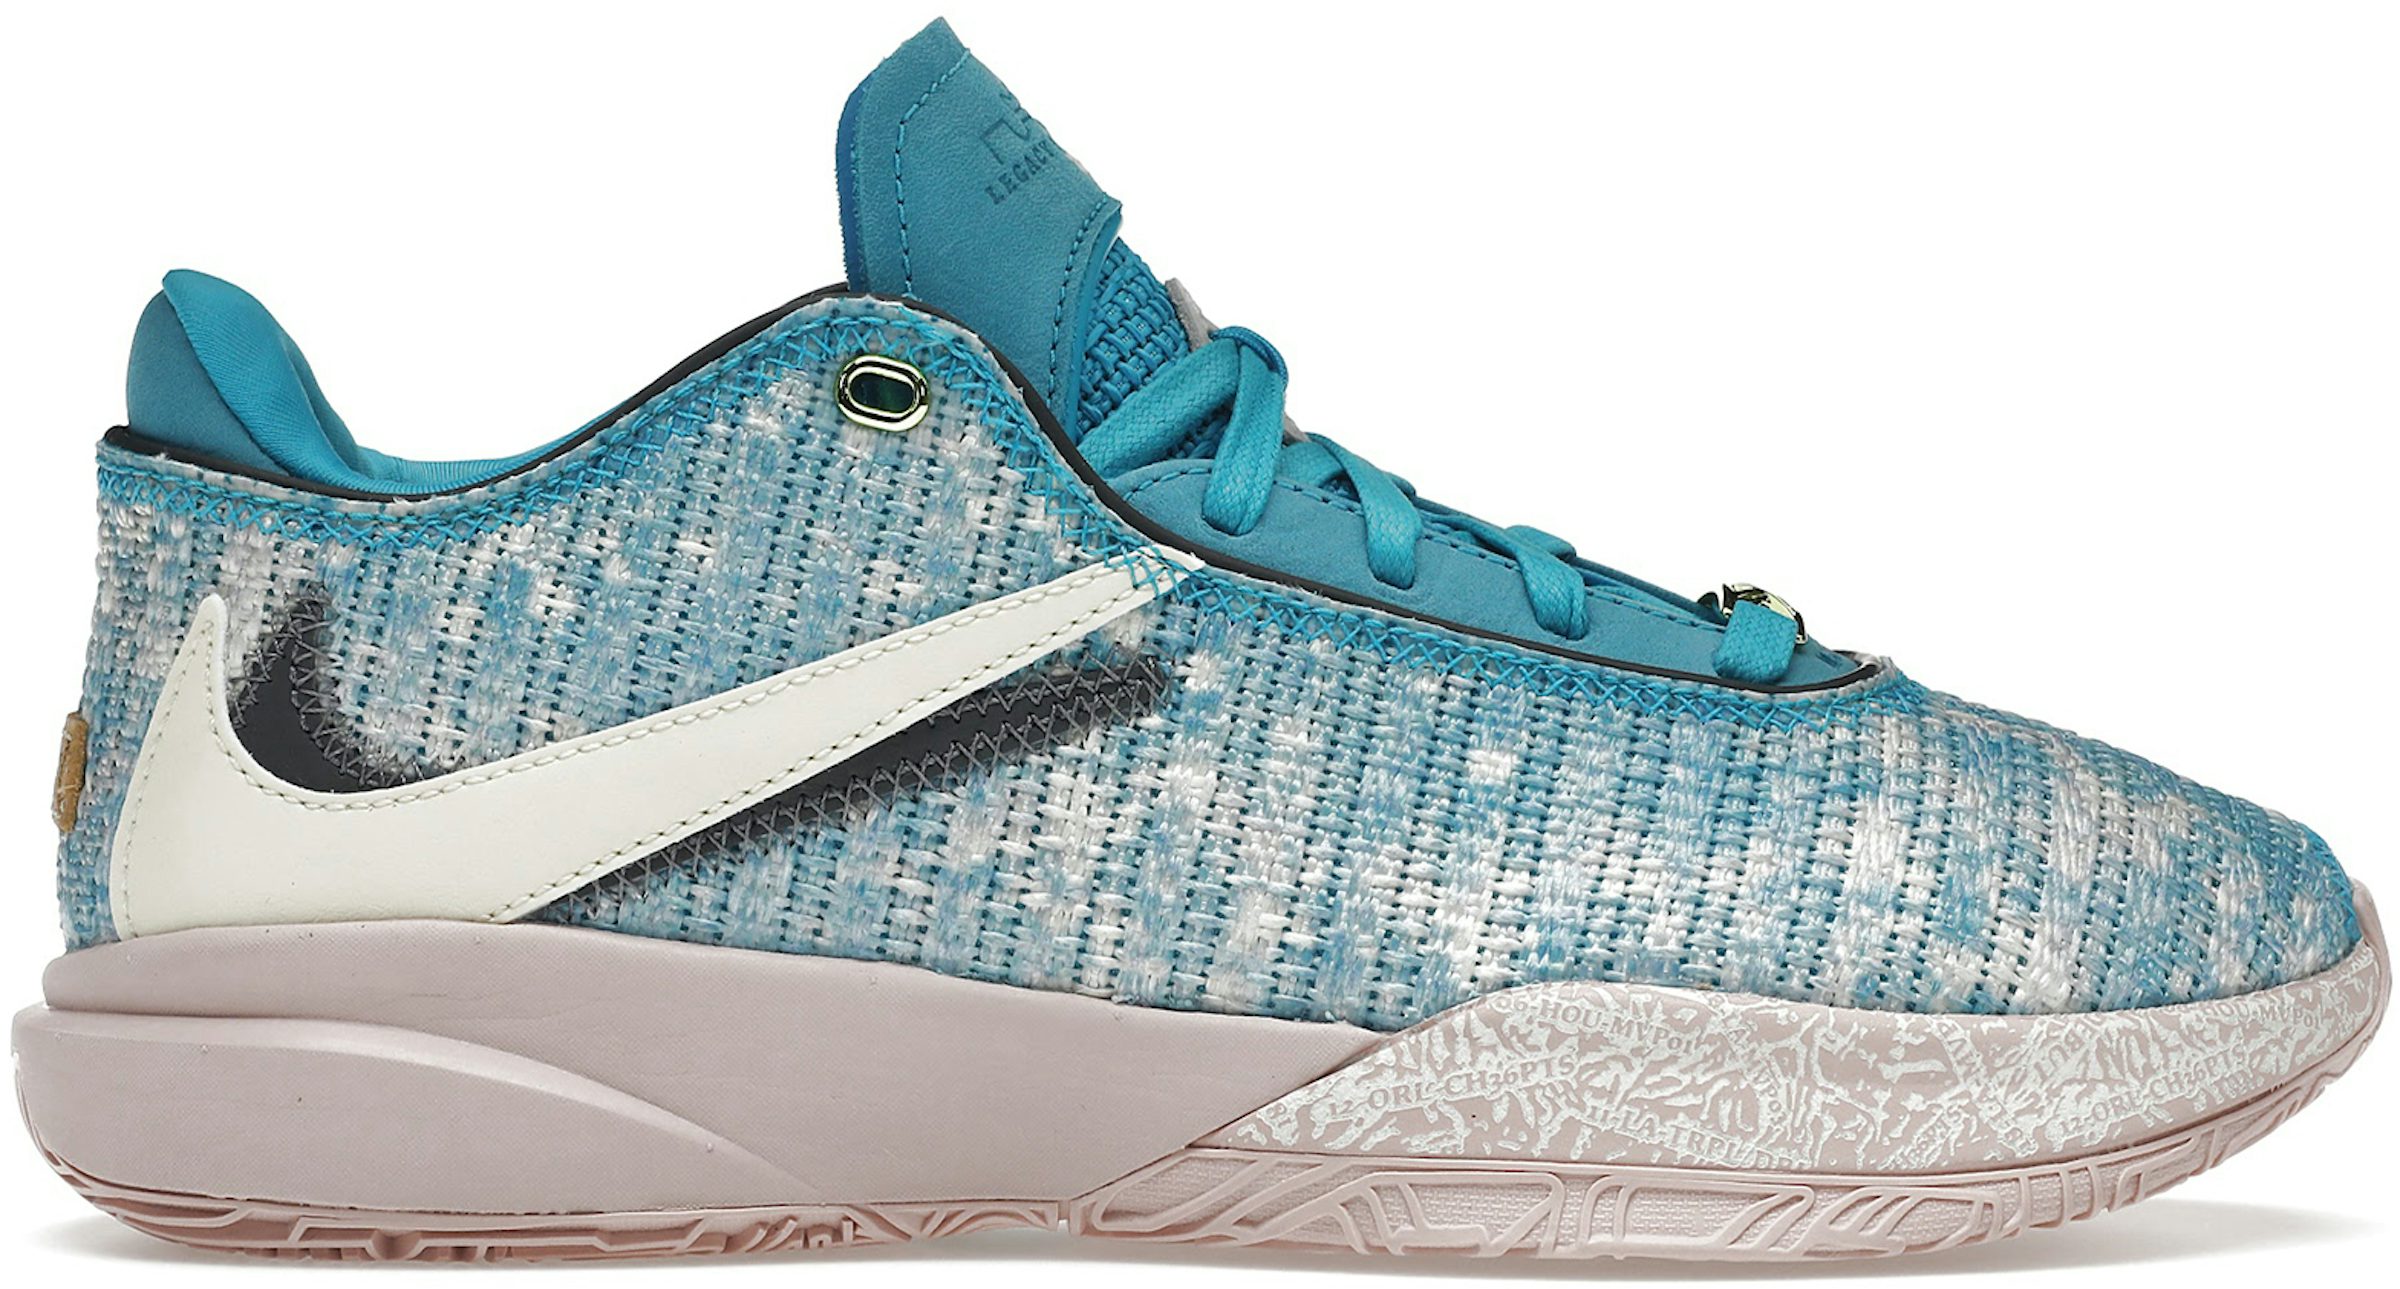 Nike Basketball Releases NBA All-Star Colorways - Sports